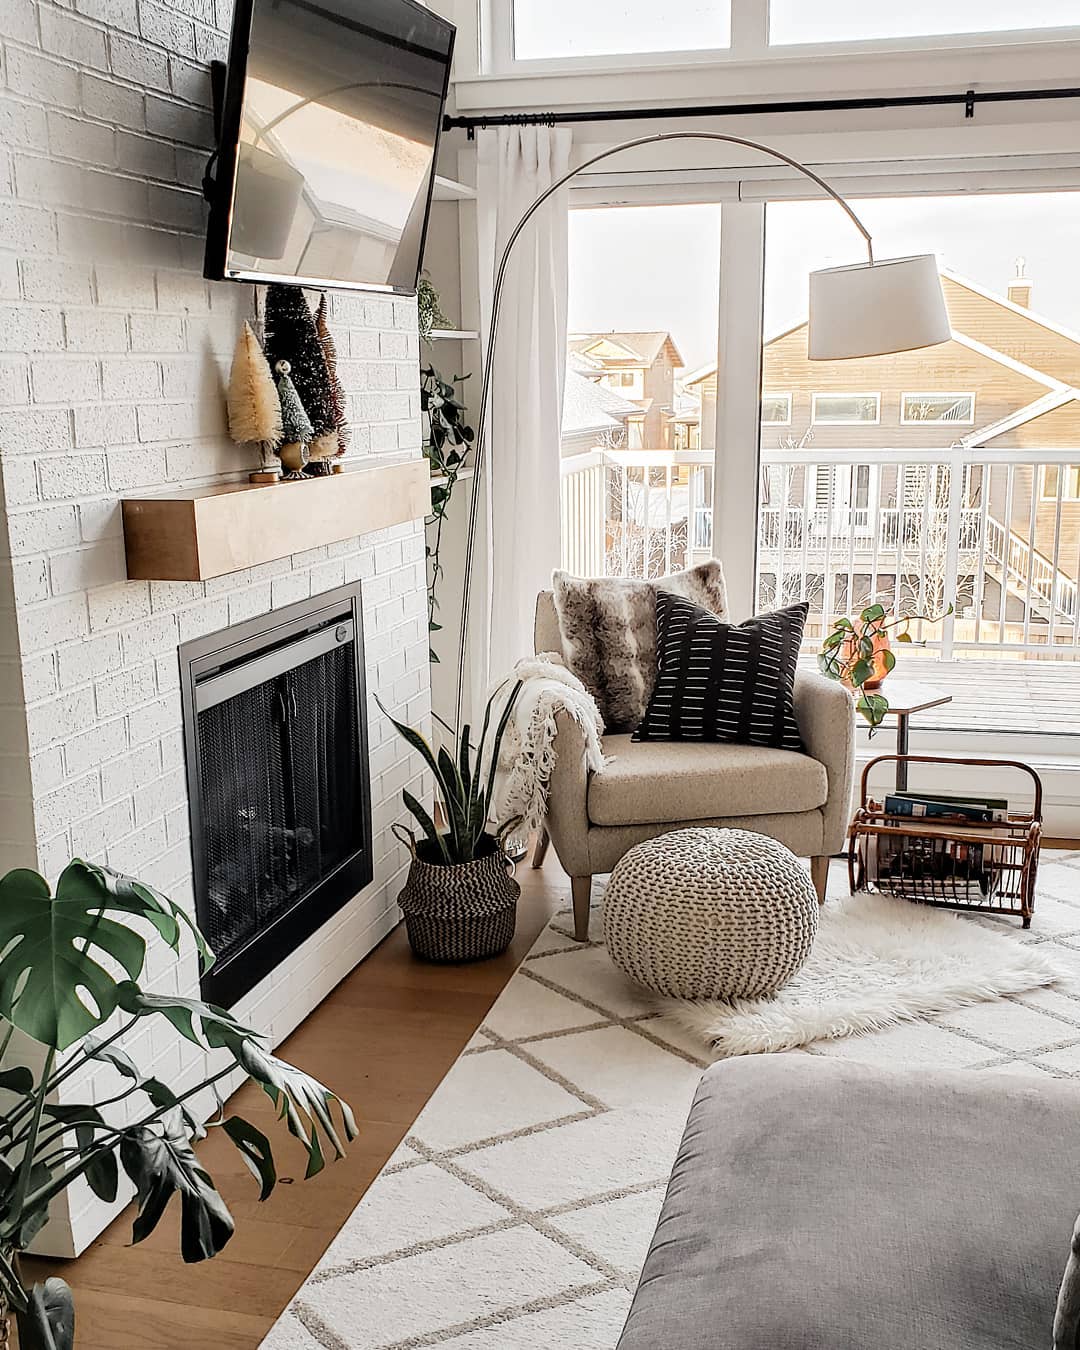 Living with white walls, wood floors, and all white decor. Photo by Instagram user @theblushhome